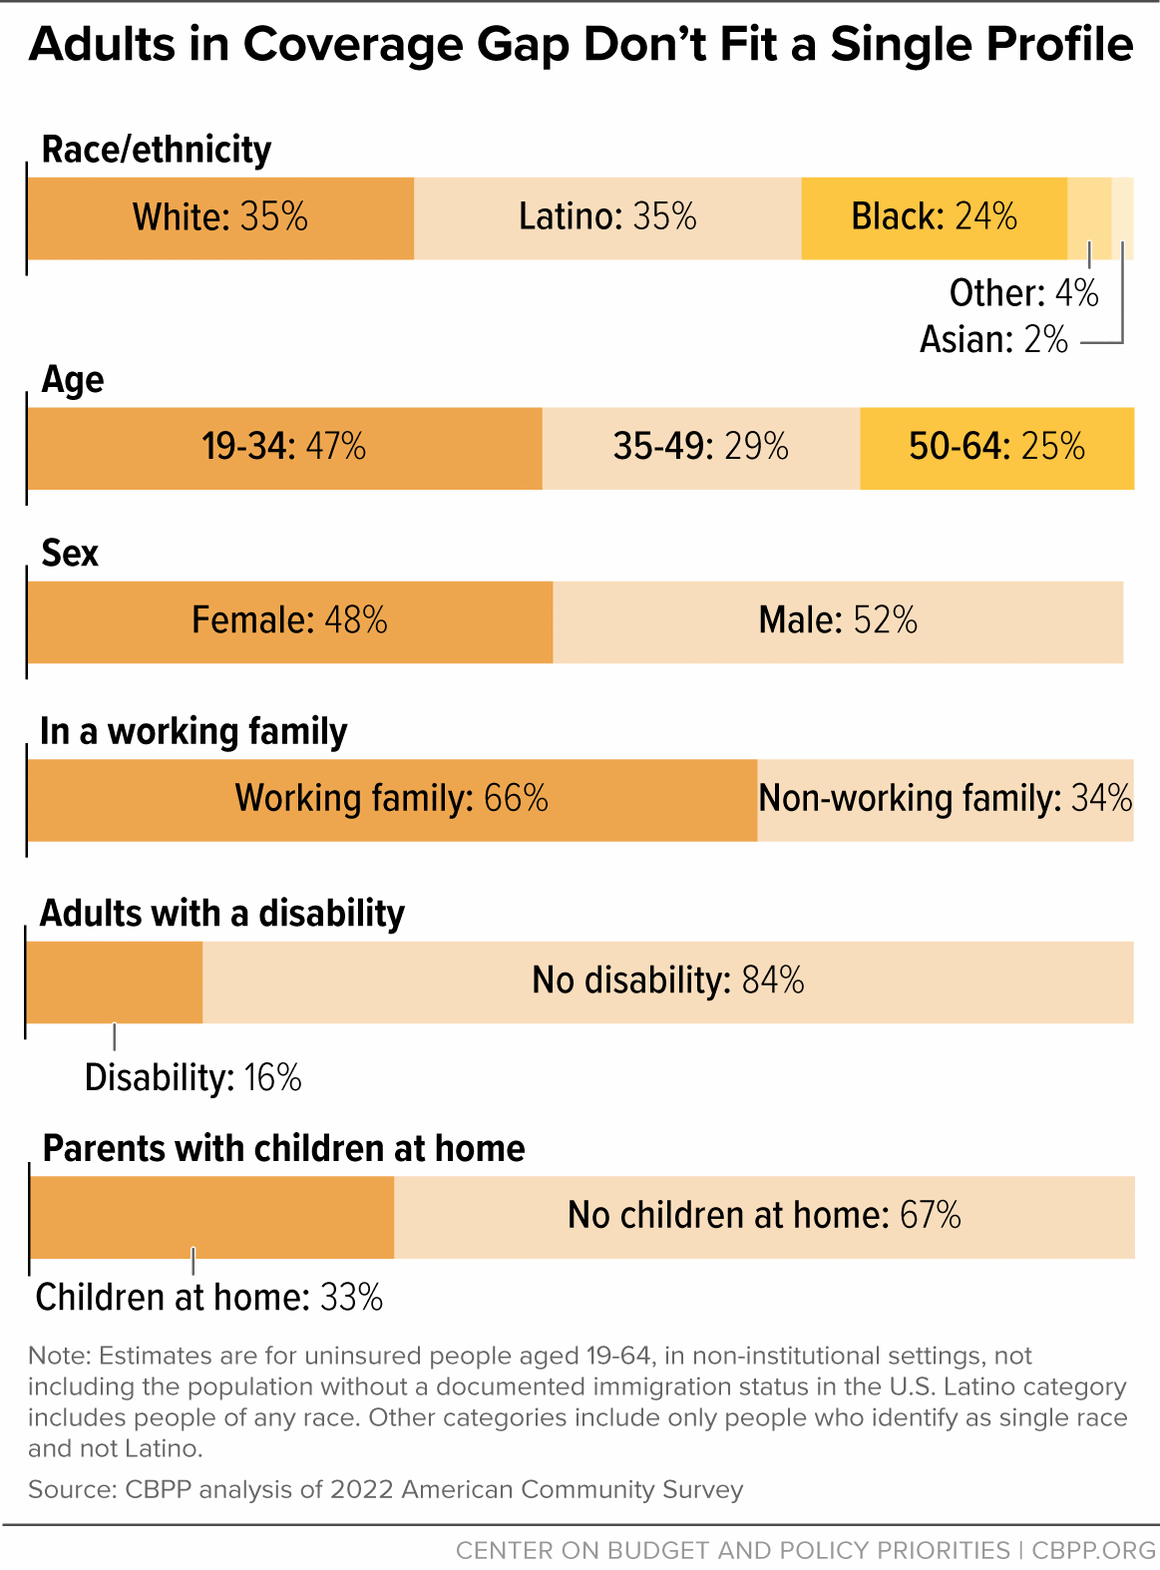 Adults in Coverage Gap Don't Fit a Single Profile